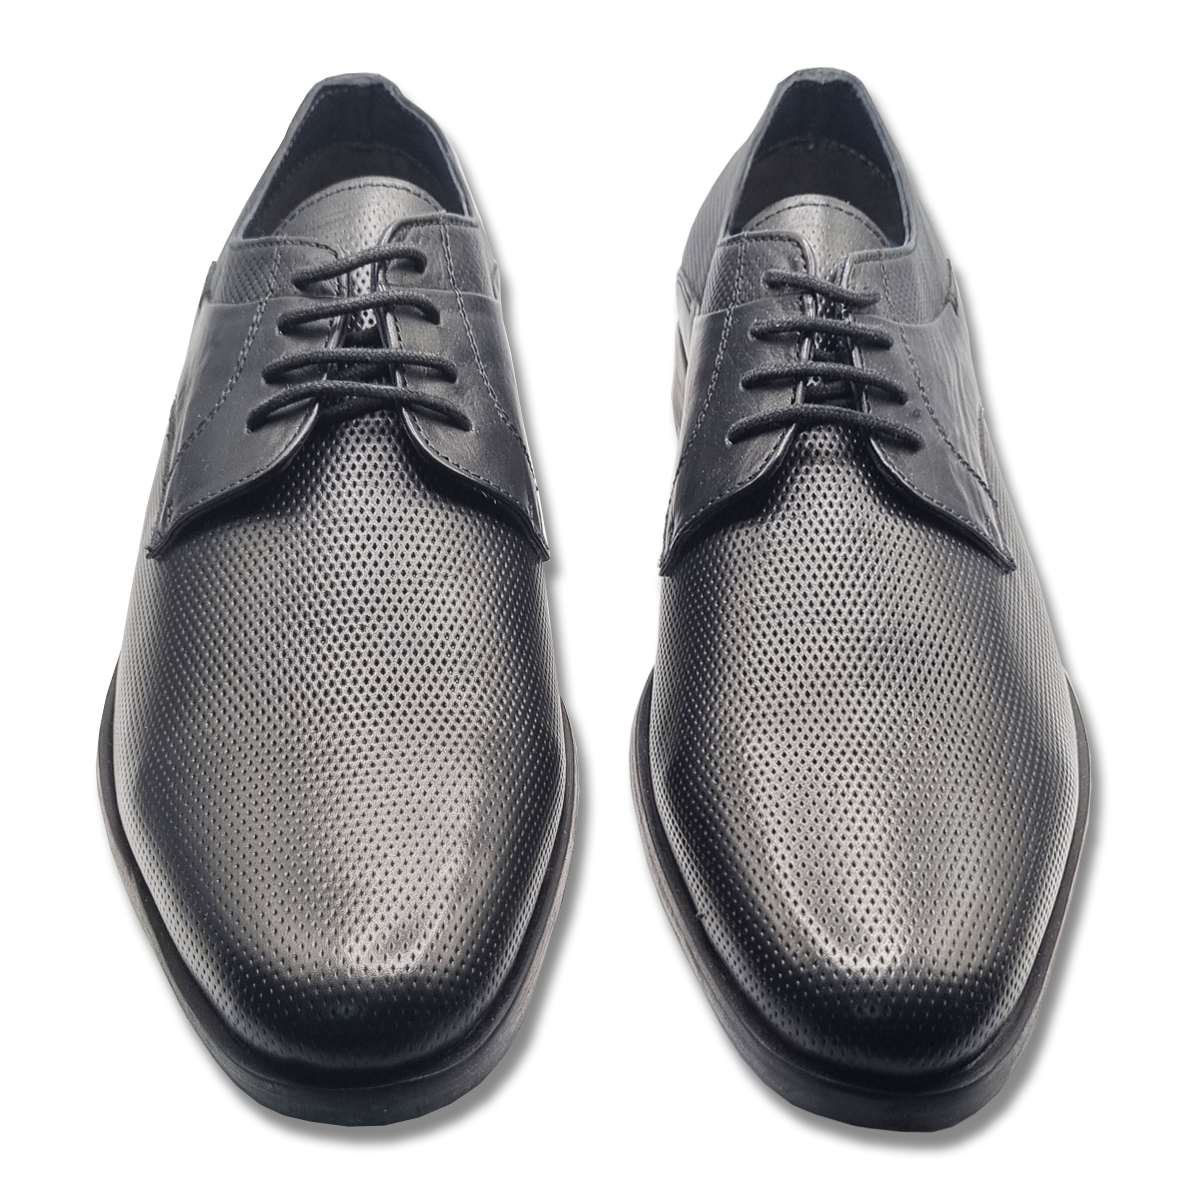 Derby Dotted Lace-Up Shoes For Men Black - Laurence Olivier